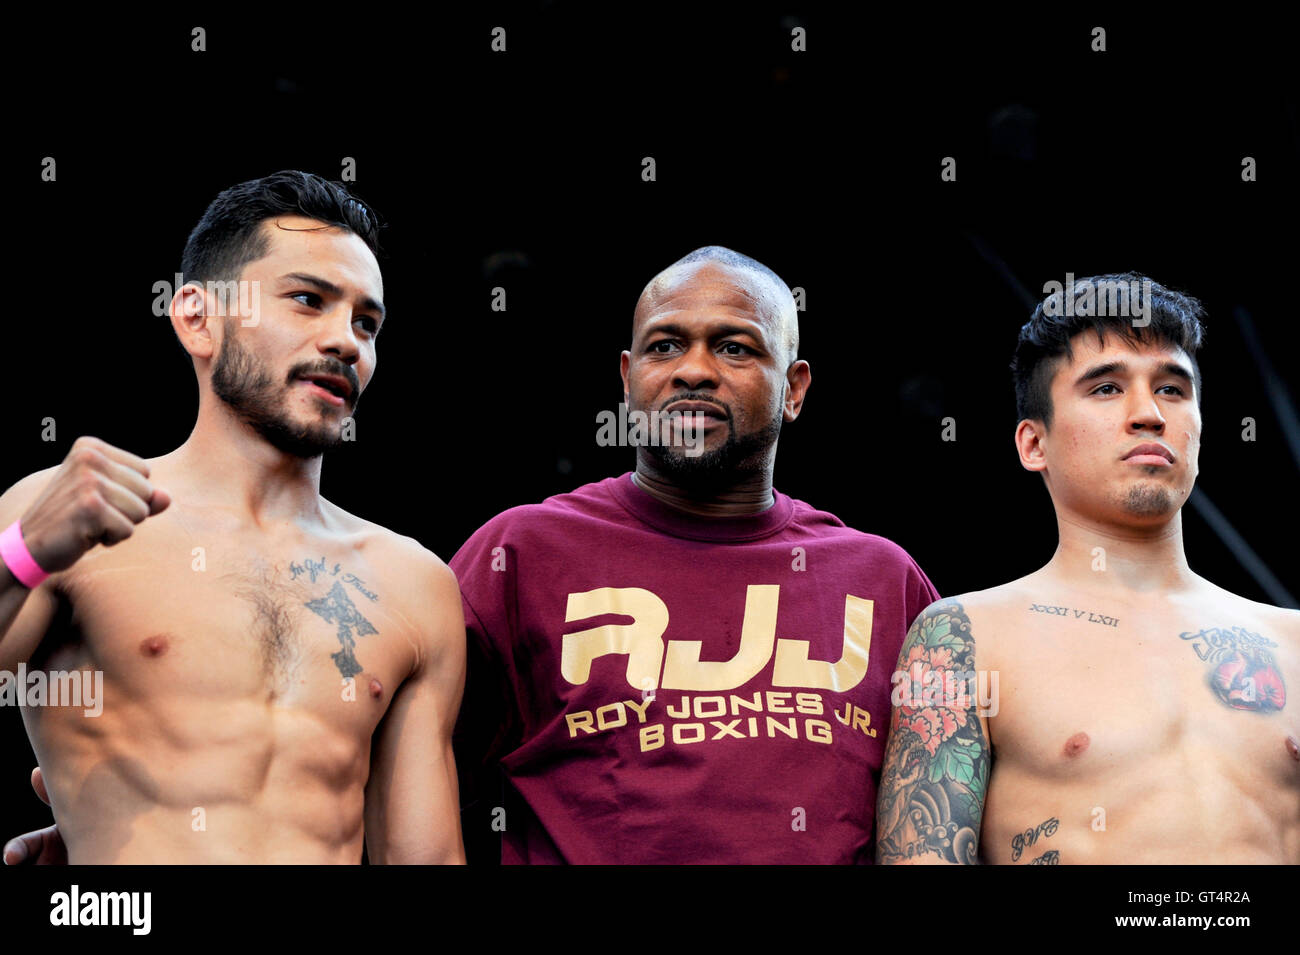 Las Vegas, Nevada September 8, 2016 -  The “Knockout Night at the D” series, presented by the D Las Vegas and DLVEC and is promoted by Roy Jones Jr. The main event pins Emmanuel “Renegade” Robles against Steve “The Dragon” Claggett in a 10-round junior welterweight match up. The boxers facing off at the weigh-in before the fight. Credit:  Ken Howard/Alamy Live News Stock Photo